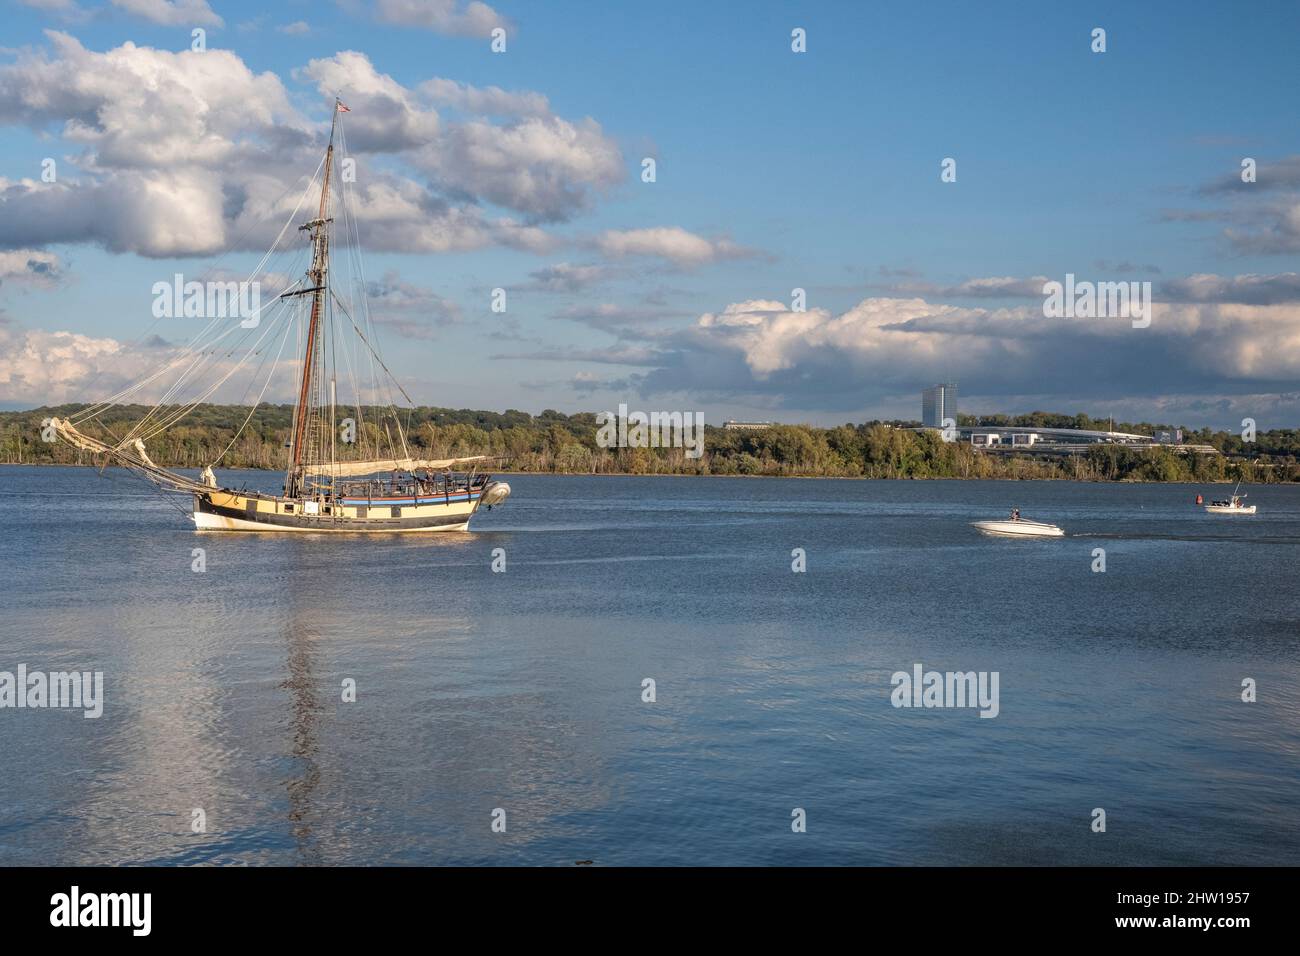 Tall ship Providence Replica Sailing on the Potomac River at Alexandria, Virginia.  MGM National Harbor Casino in background. Stock Photo